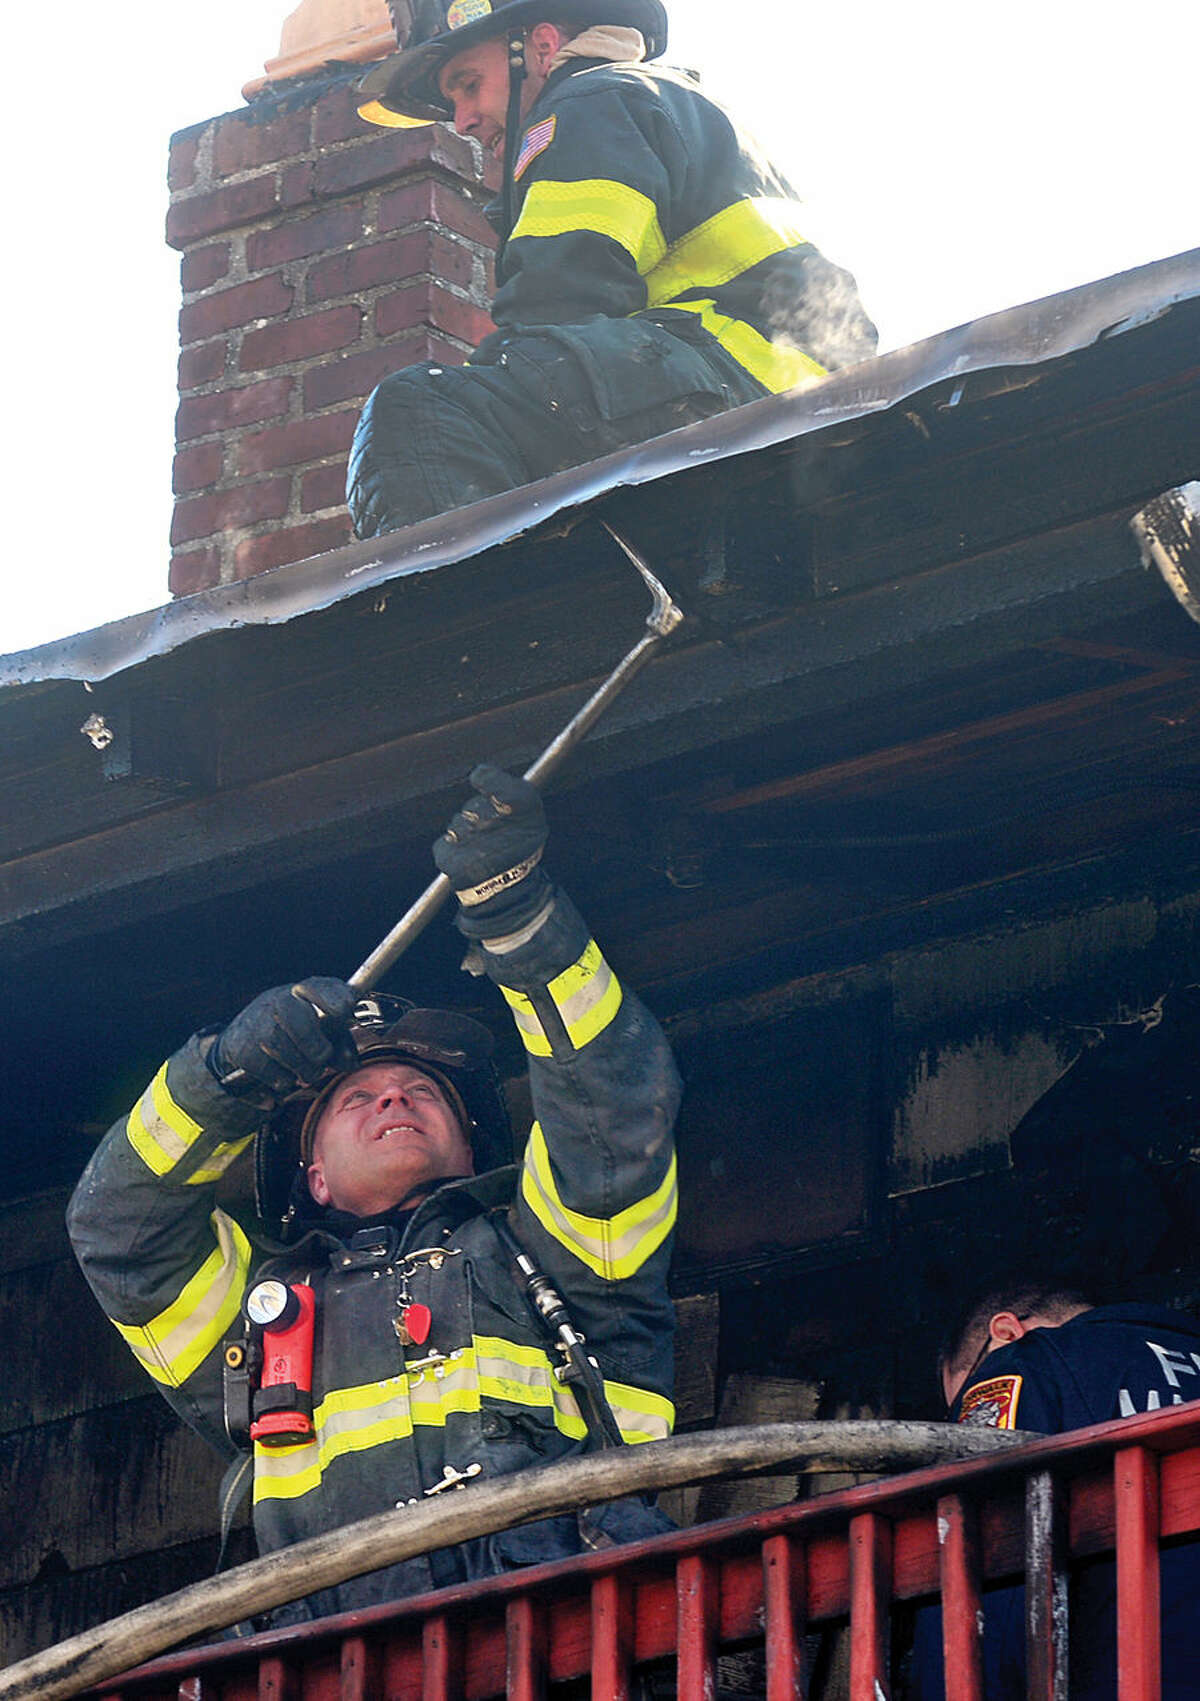 Hour photo / Erik Trautmann Norwalk firefighters battle a fire that engulfed the rear deck of the home at 25 Leuvine Street in Norwalk Tuesday afternoon.